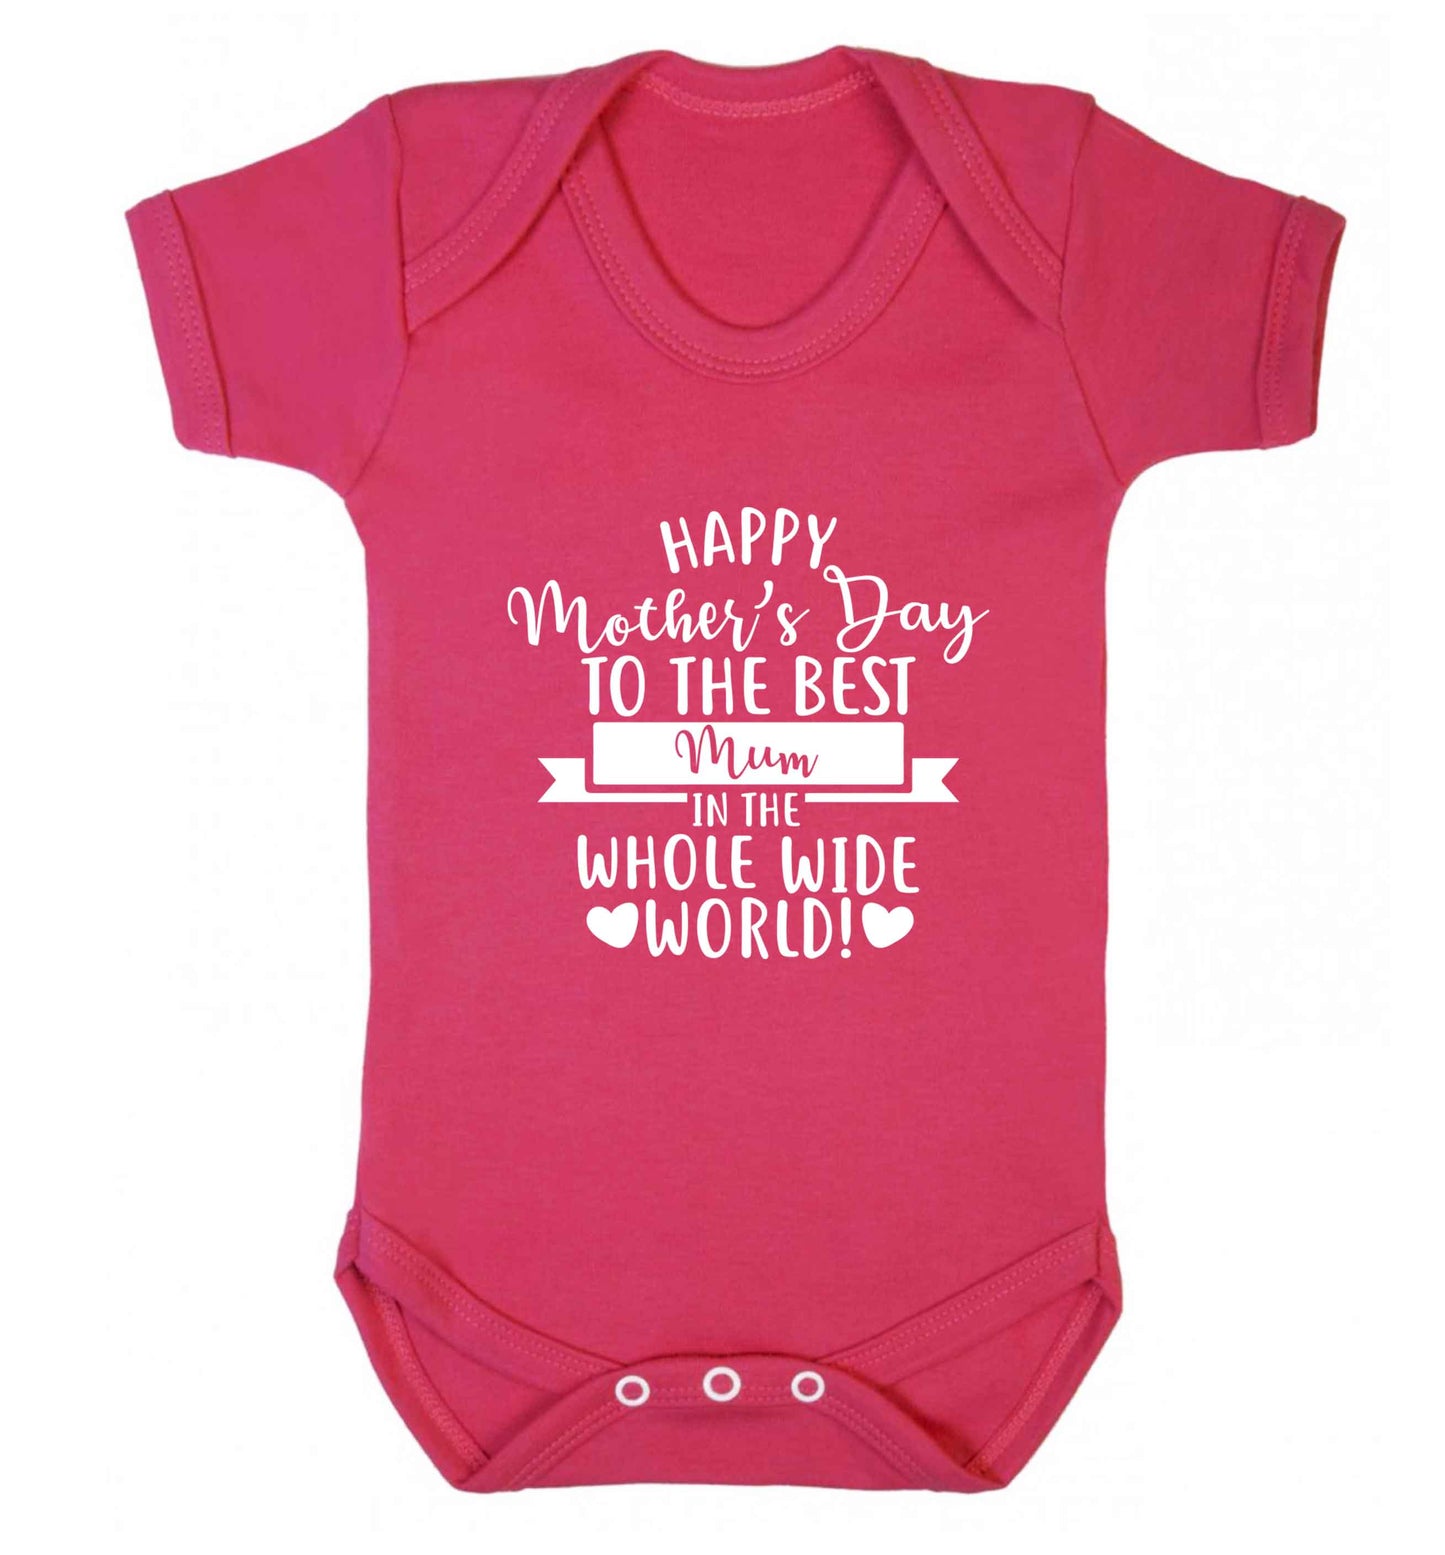 Happy mother's day to the best mum in the world baby vest dark pink 18-24 months